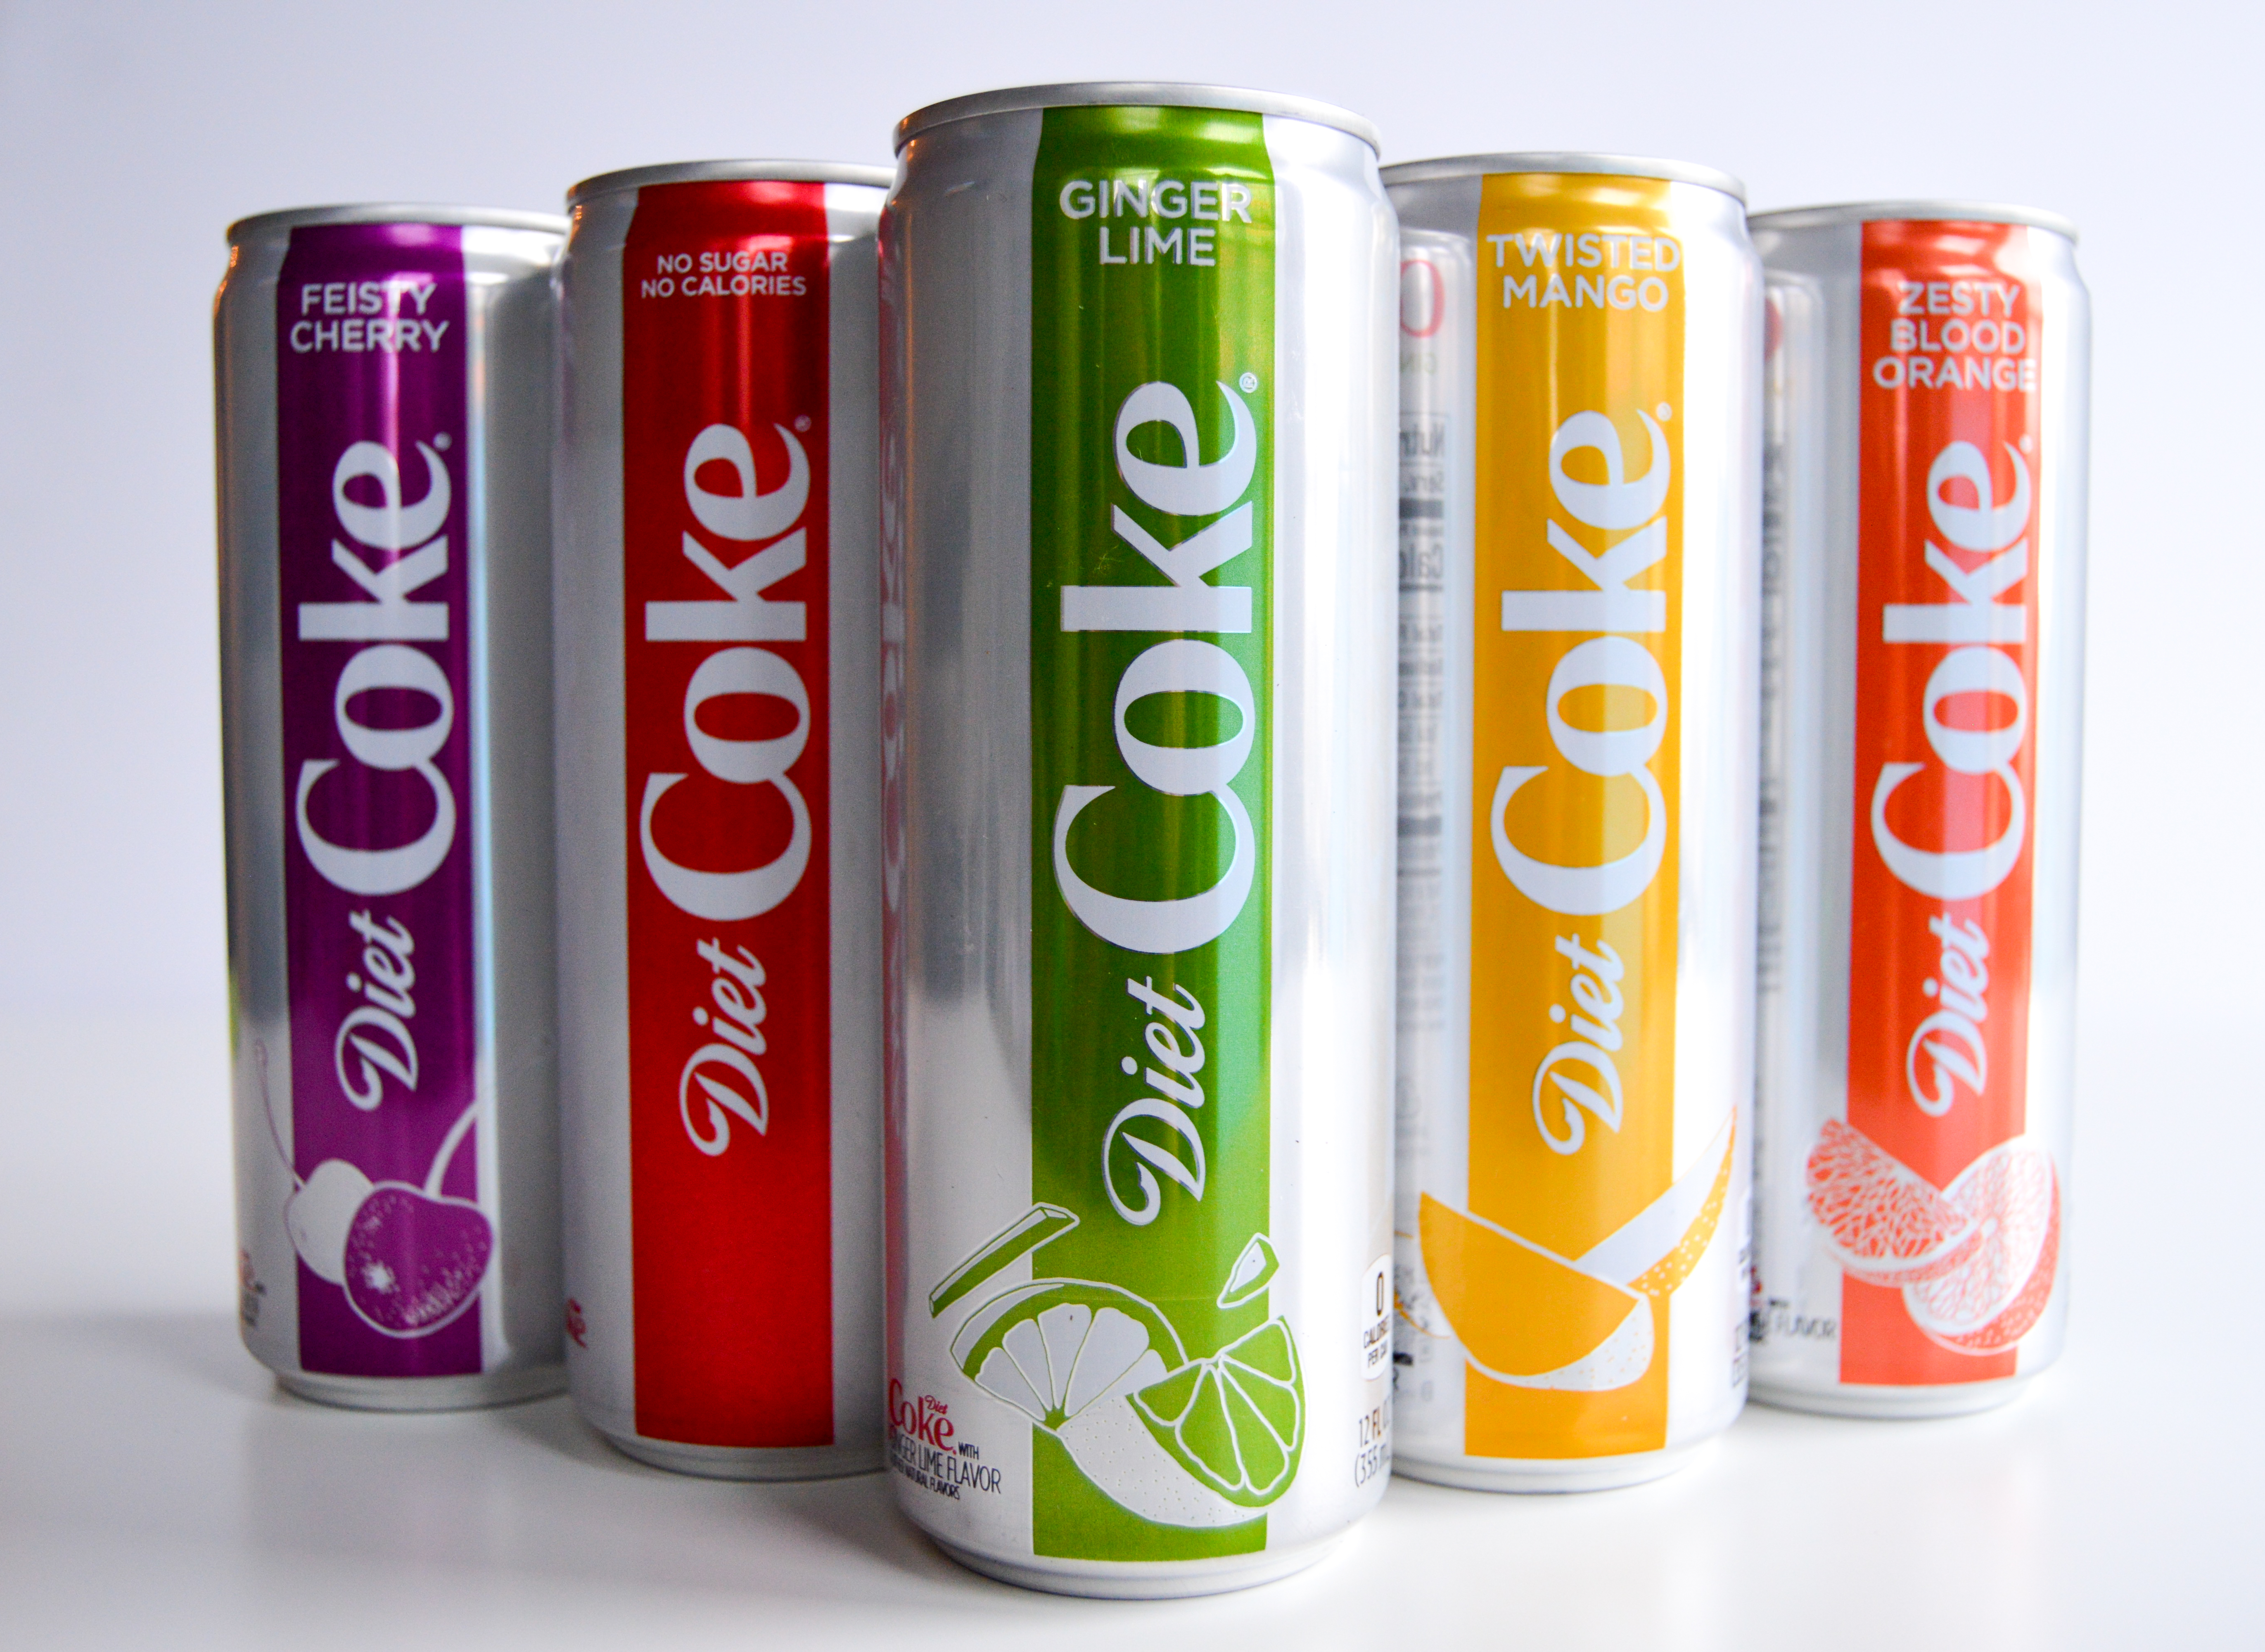 New Diet Coke Flavors: Feisty Cherry, Ginger Lime, Twisted Mango, and Zesty Blood Orange